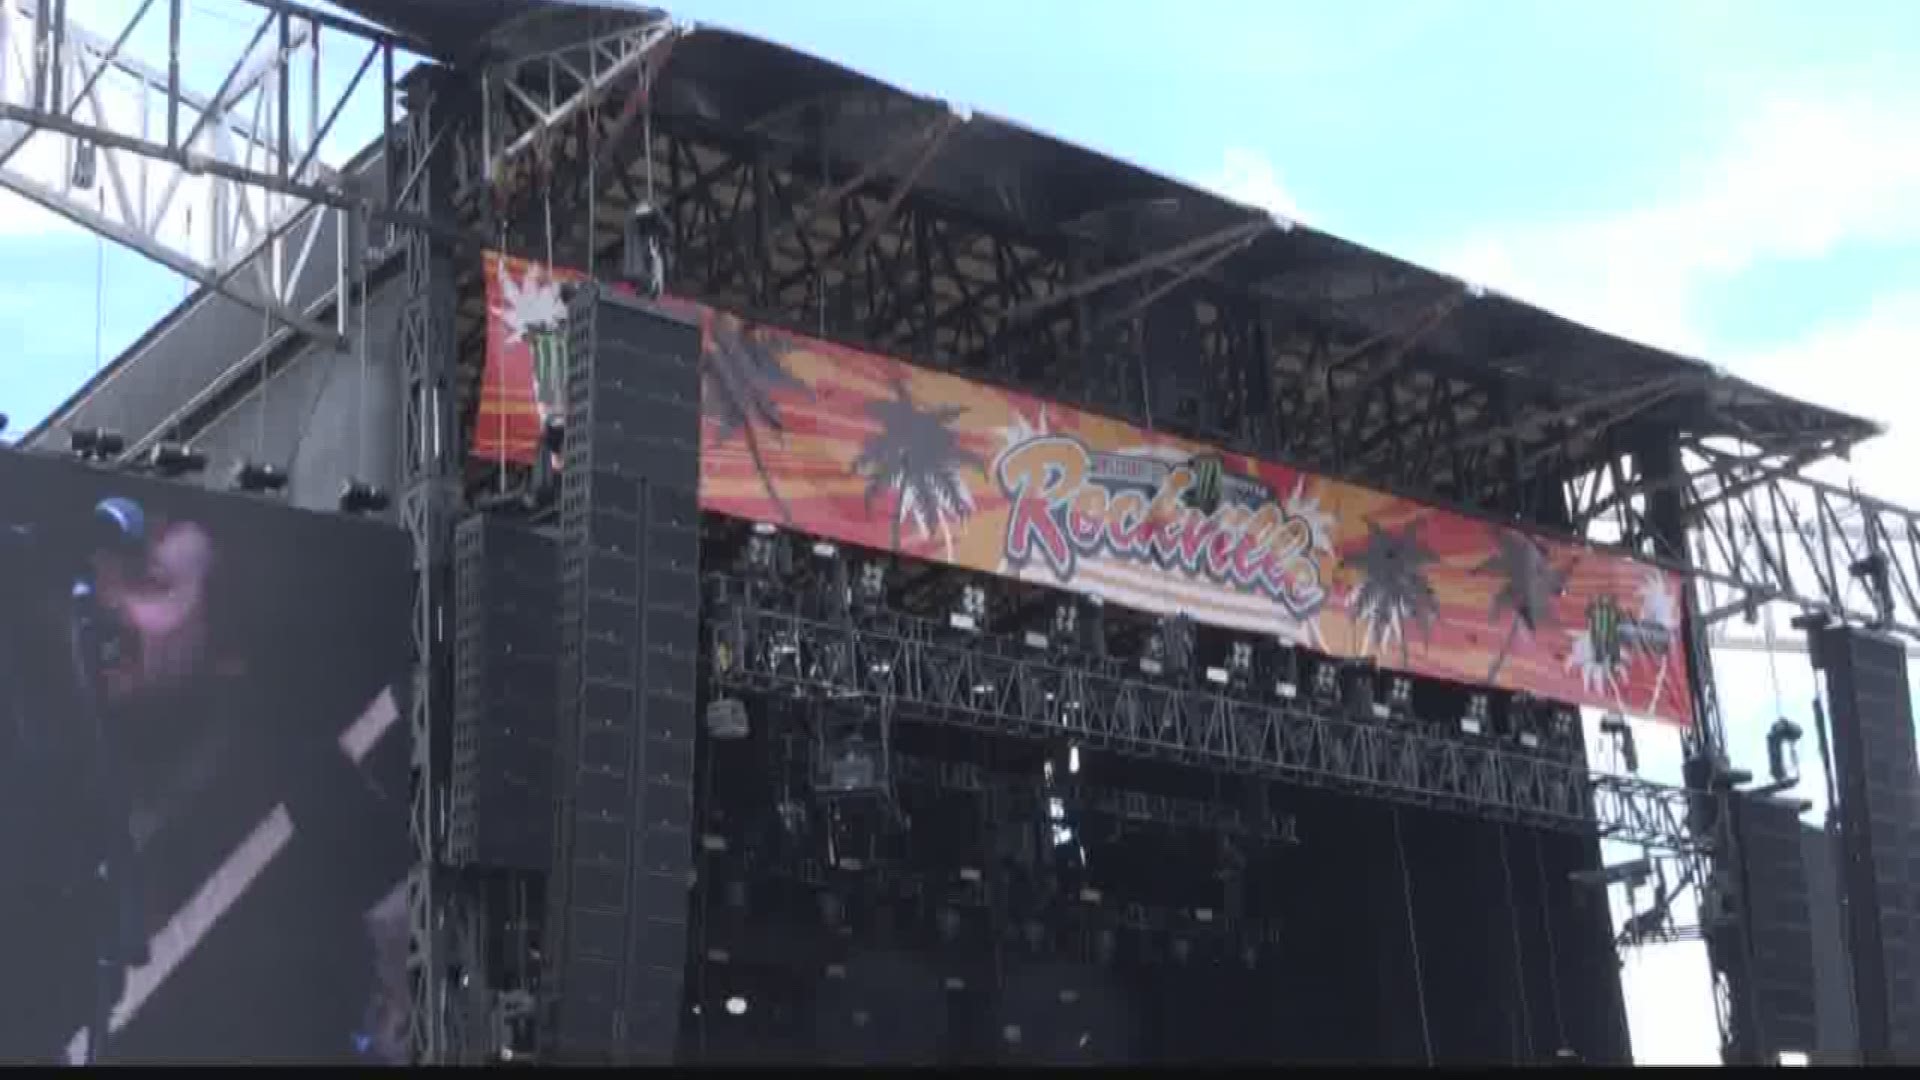 Welcome to Rockville will return with a 3-day concert starting on May 8 and ending on May 10 at the Daytona International Speedway for its 10-year-anniversary.